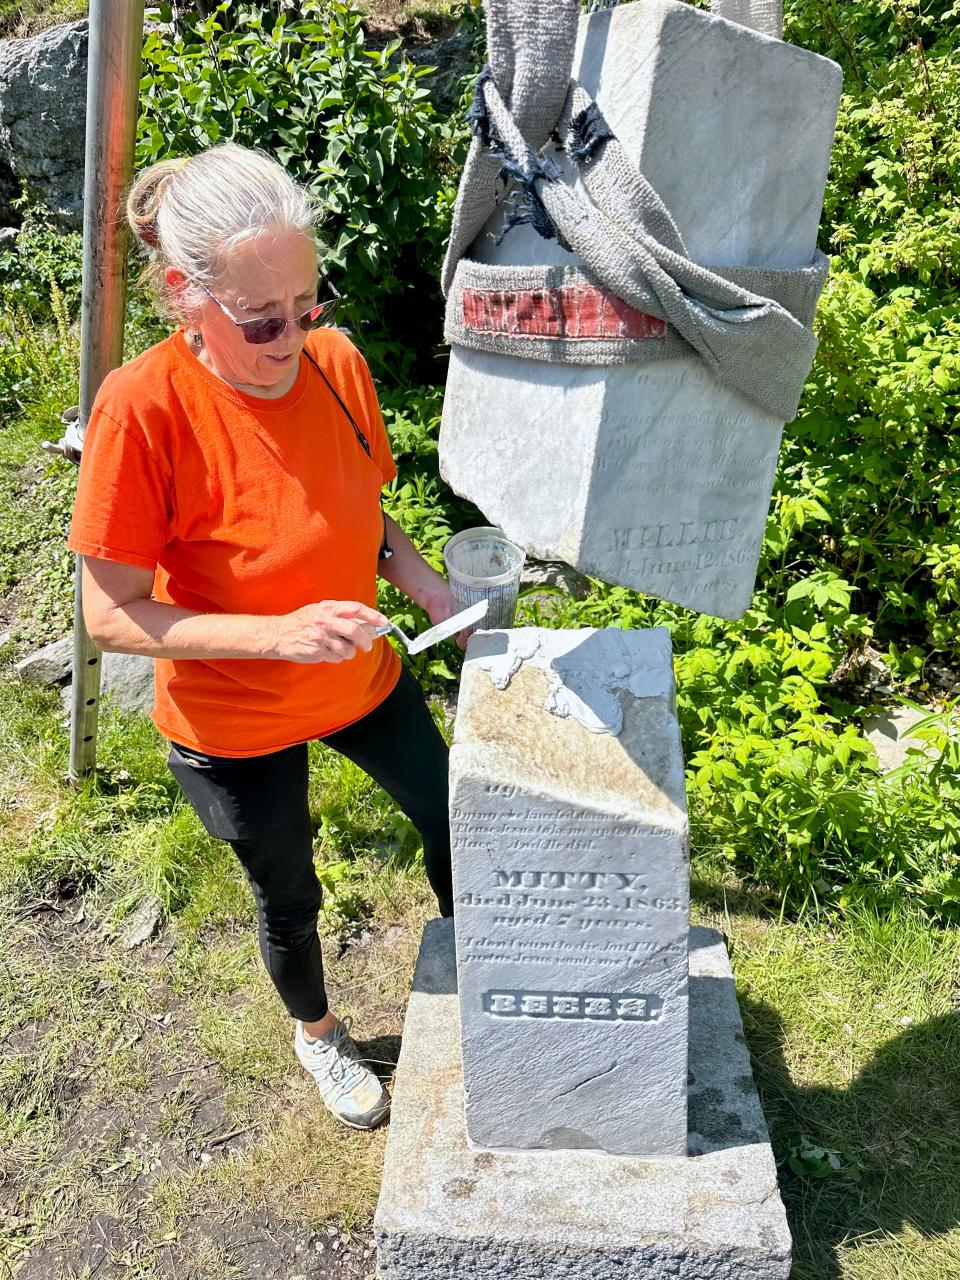 TaMara Conde, who has been restoring gravestones for 25 years, joined ISHRA volunteers on Star Island to repair stones in a Civil War era cemetery there.